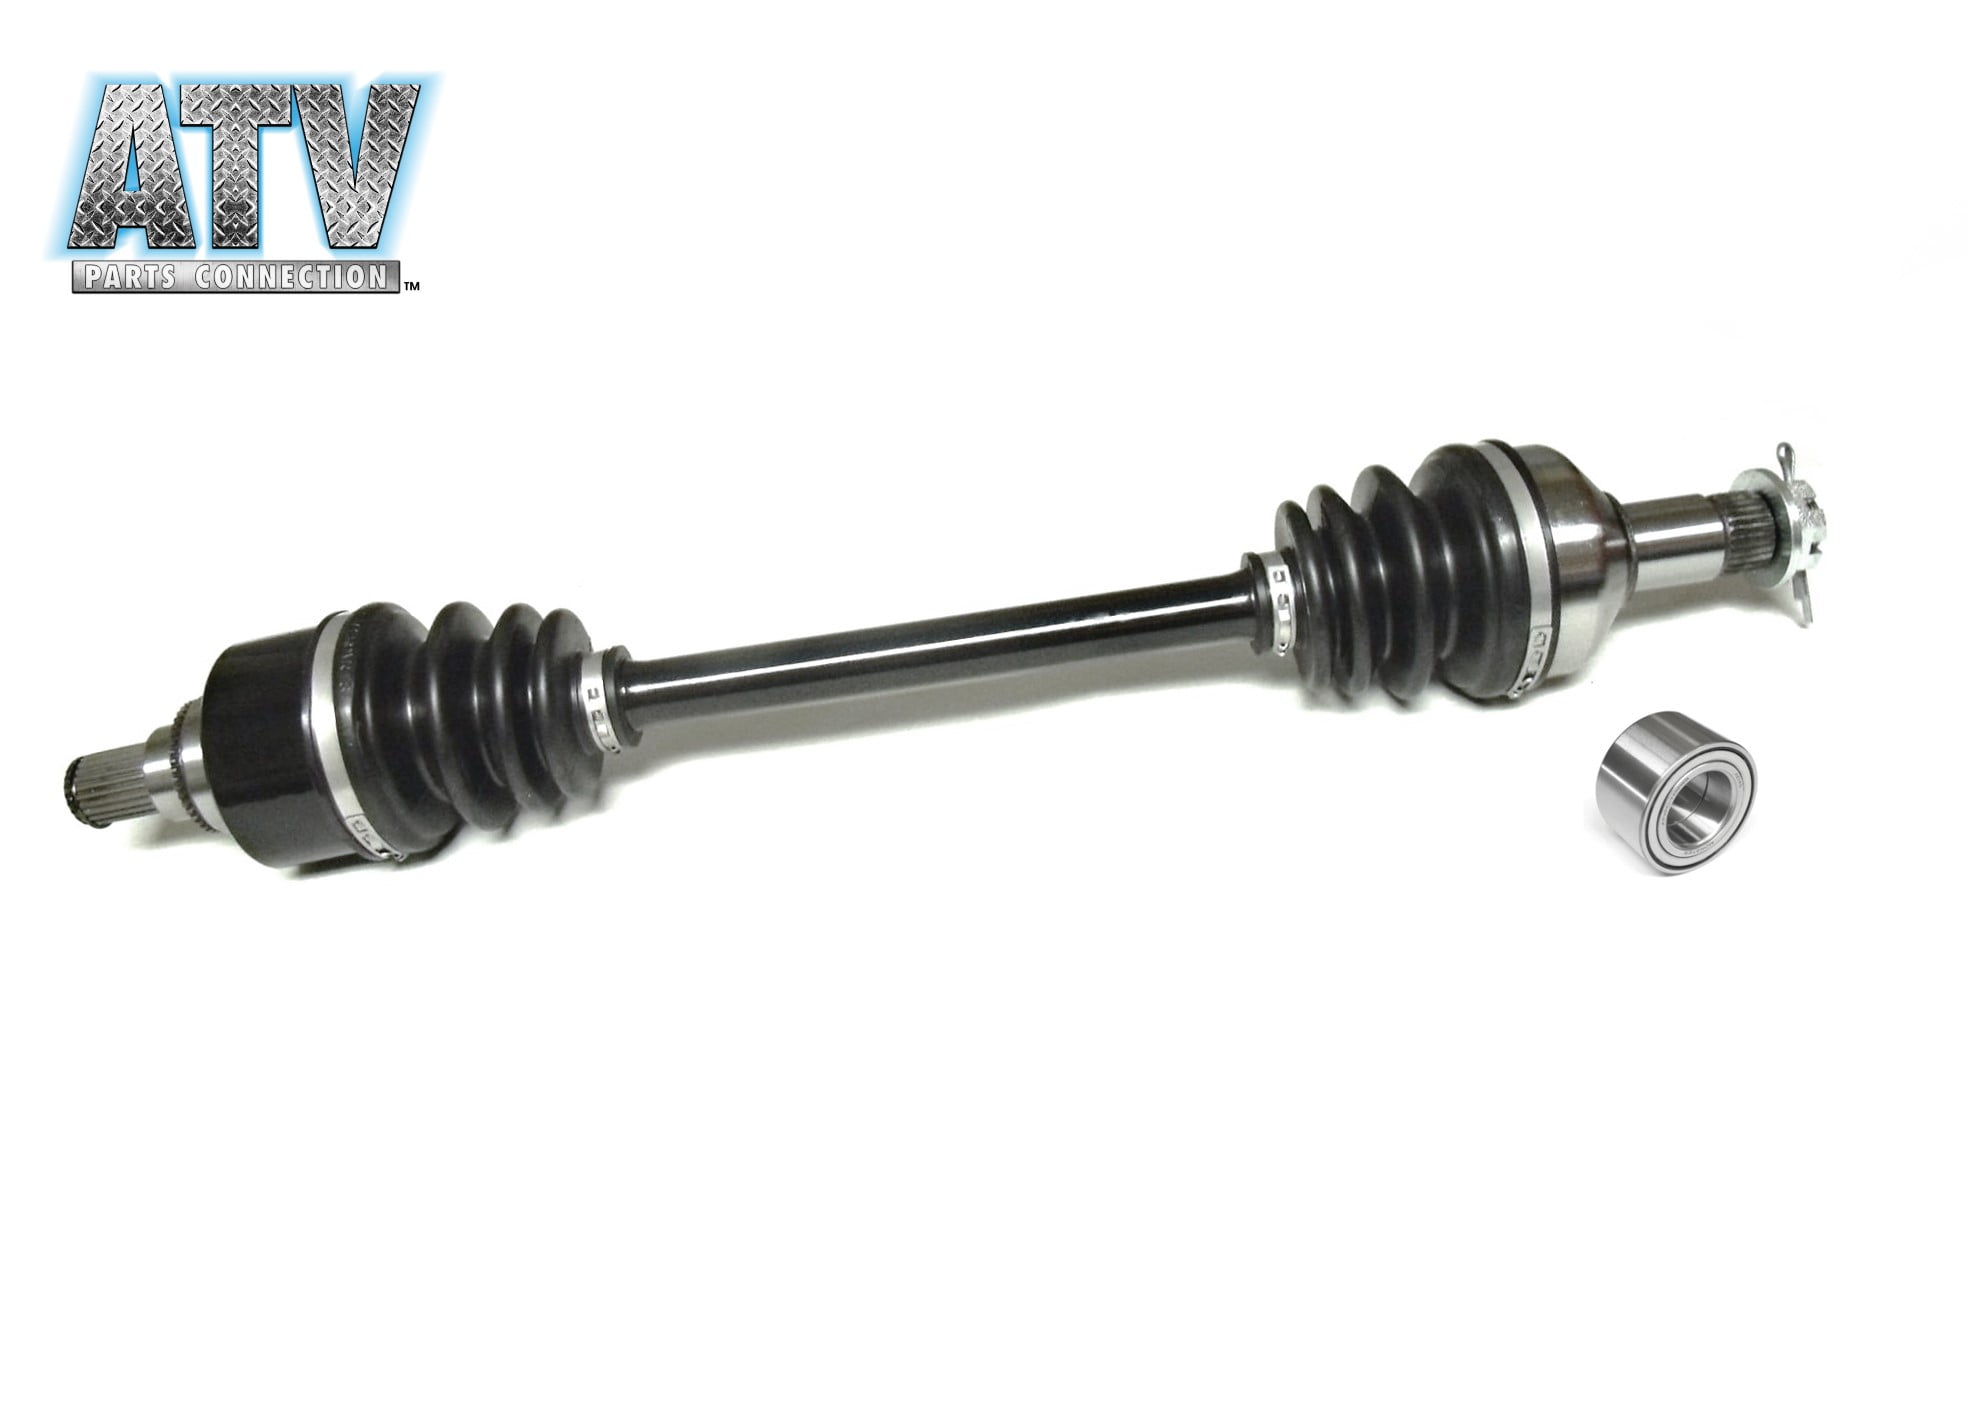 1502-954 ATVPC Front CV Axle for Arctic Cat Wildcat Trail 700 2014-2019 4x4 fits 2502-348 